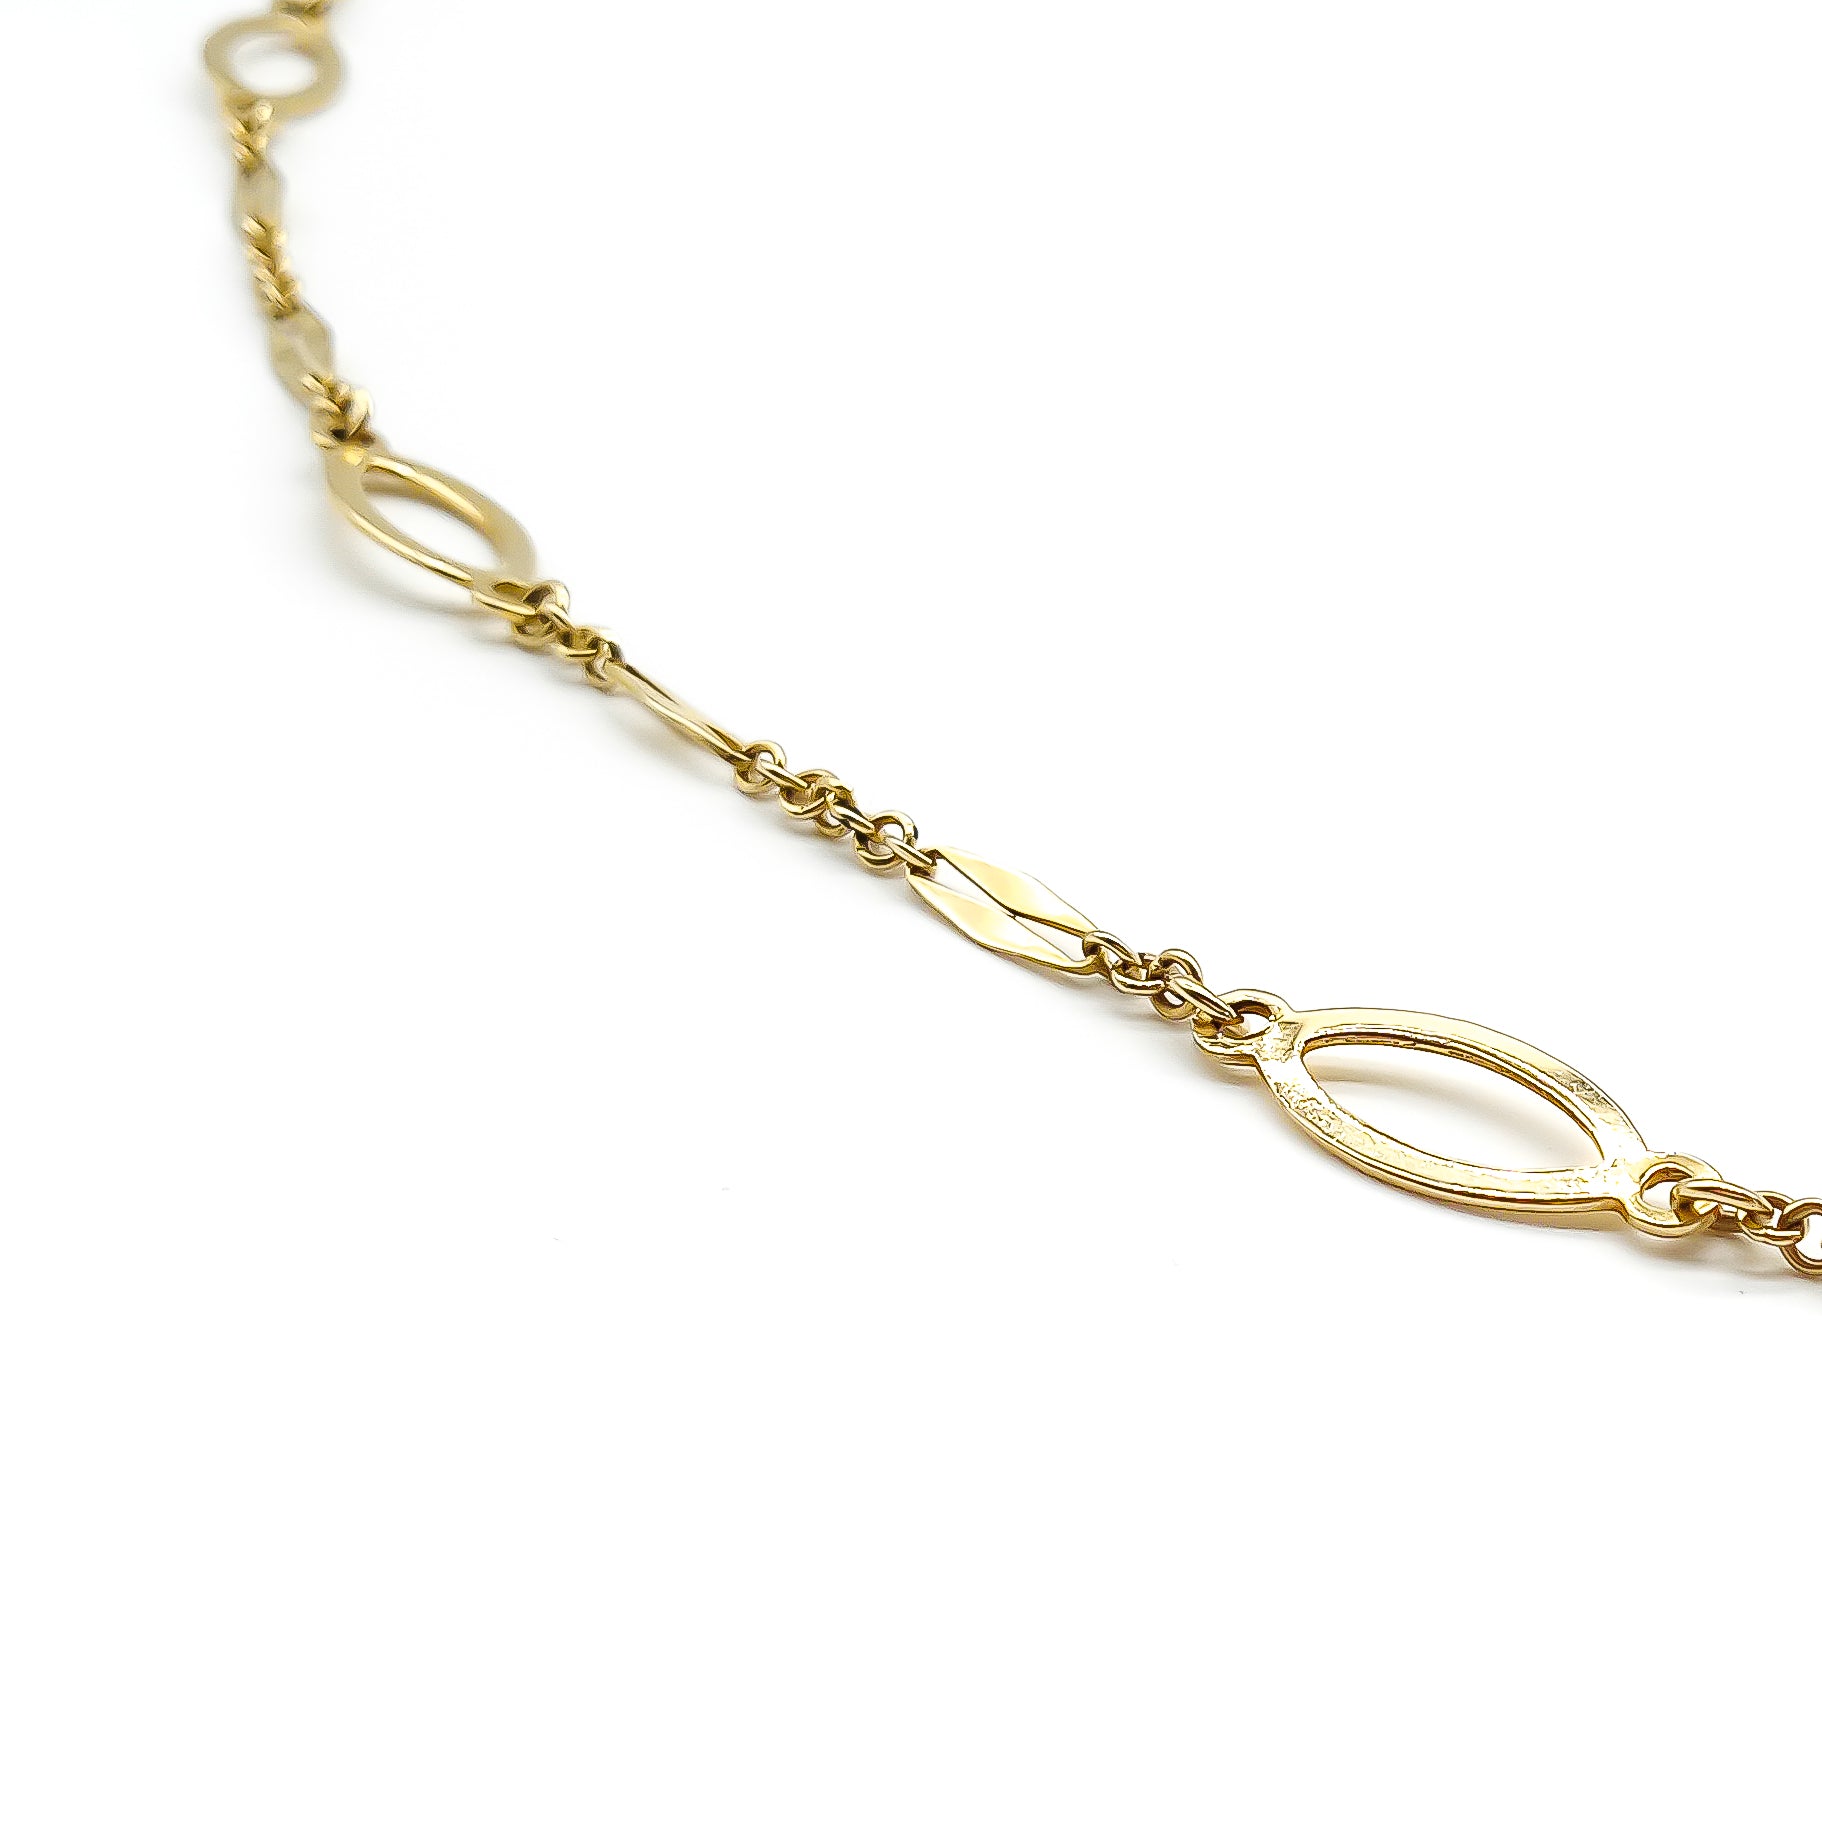 Stylish vintage 14ct yellow gold opera length necklace with fancy links.